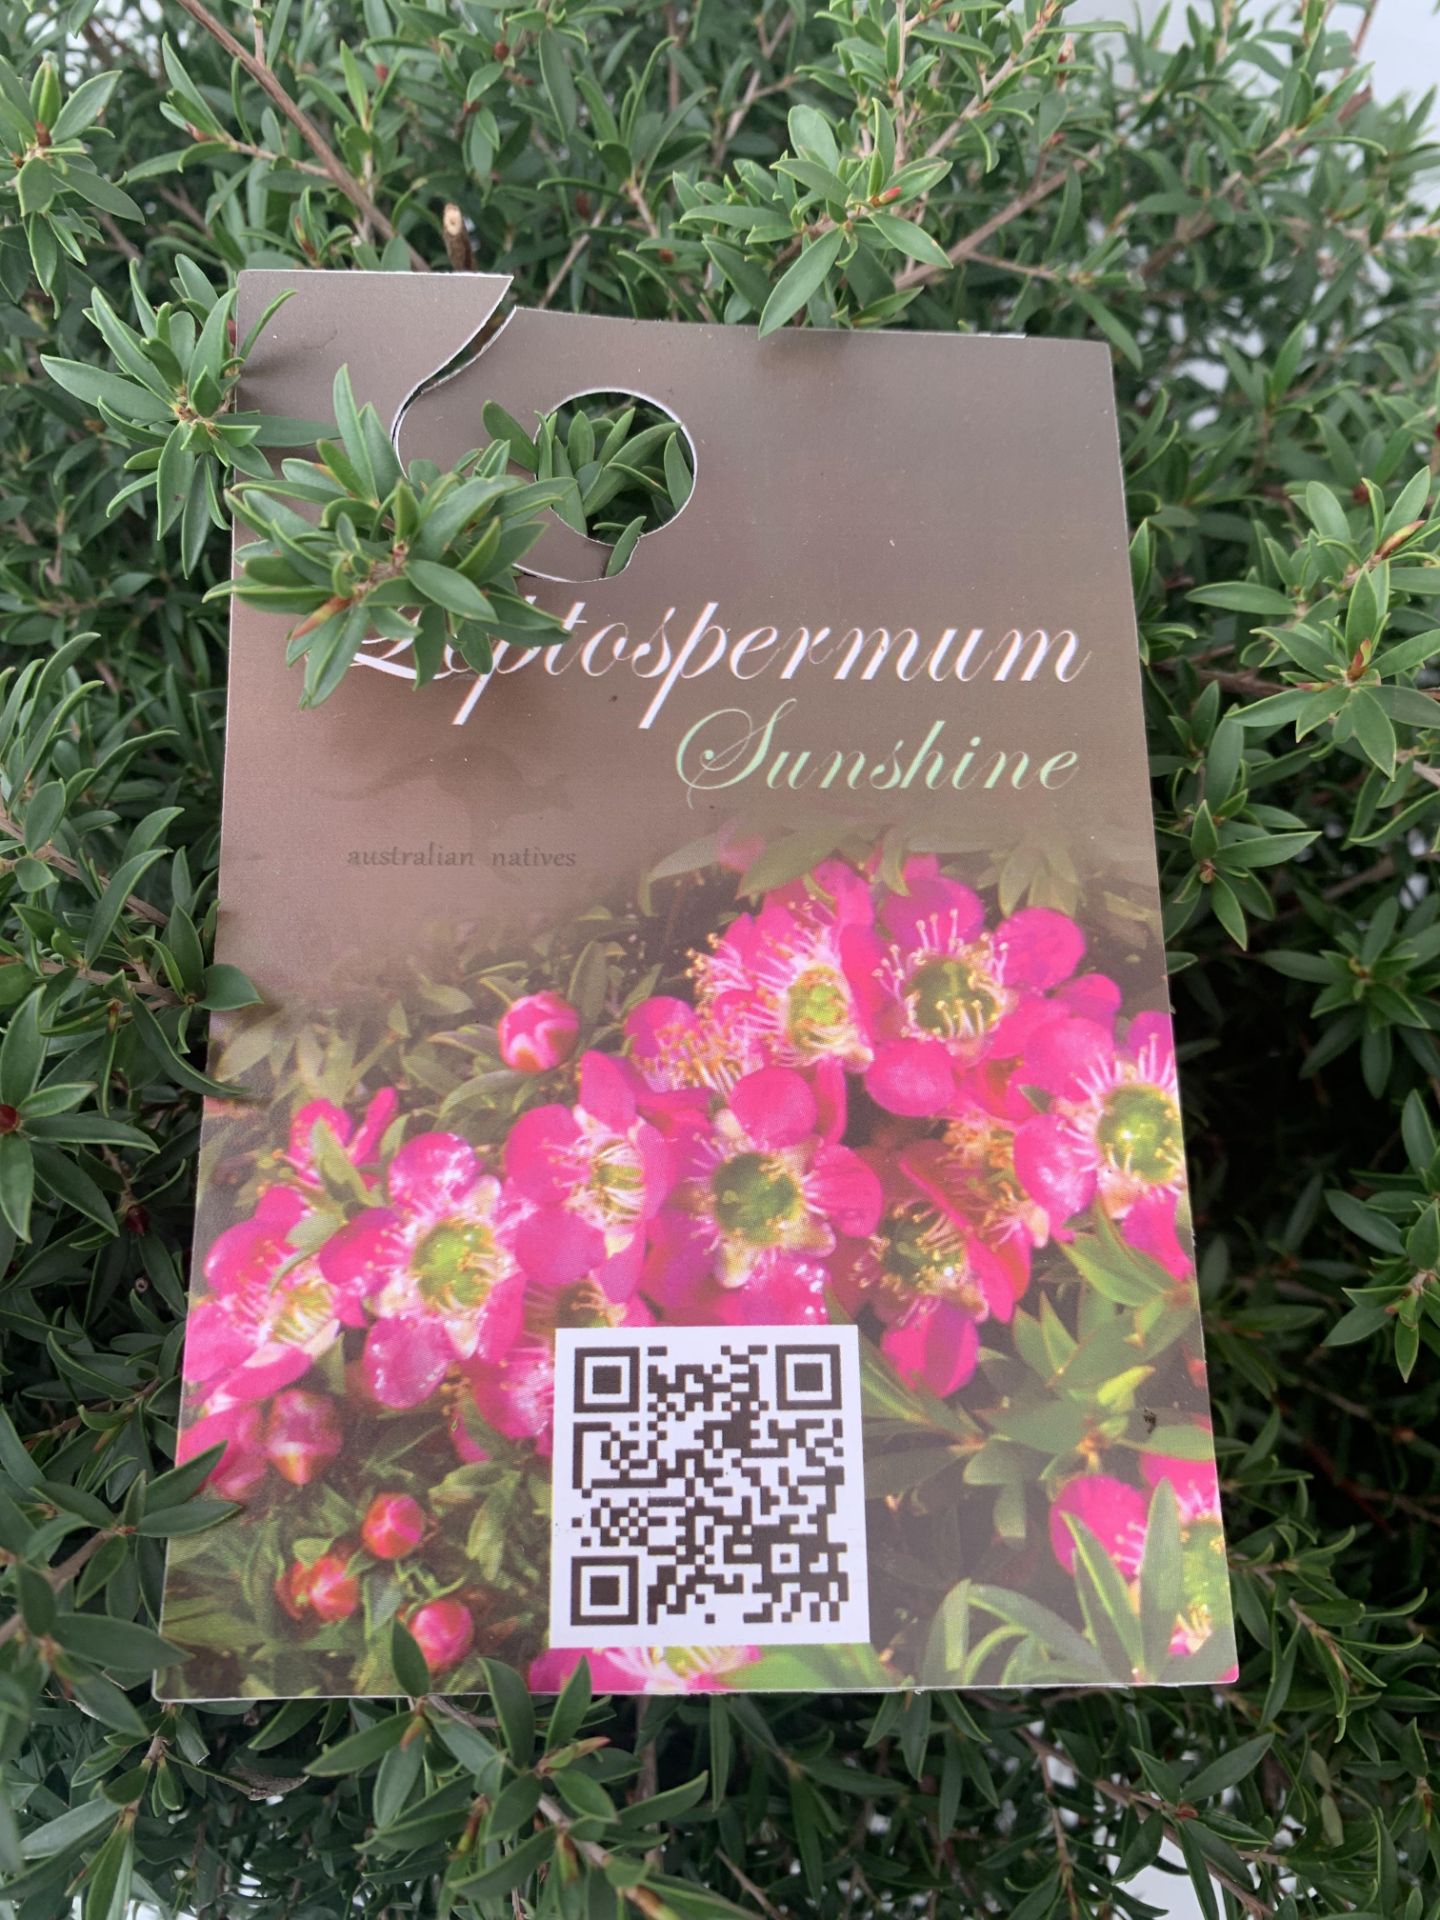 TWO LEPTOSPERMUM 'SUNSHINE' PINK SHRUBS APPROX 60CM IN HEIGHT IN FIVE LTR POTS PLUS VAT TO BE SOLD - Image 7 of 8